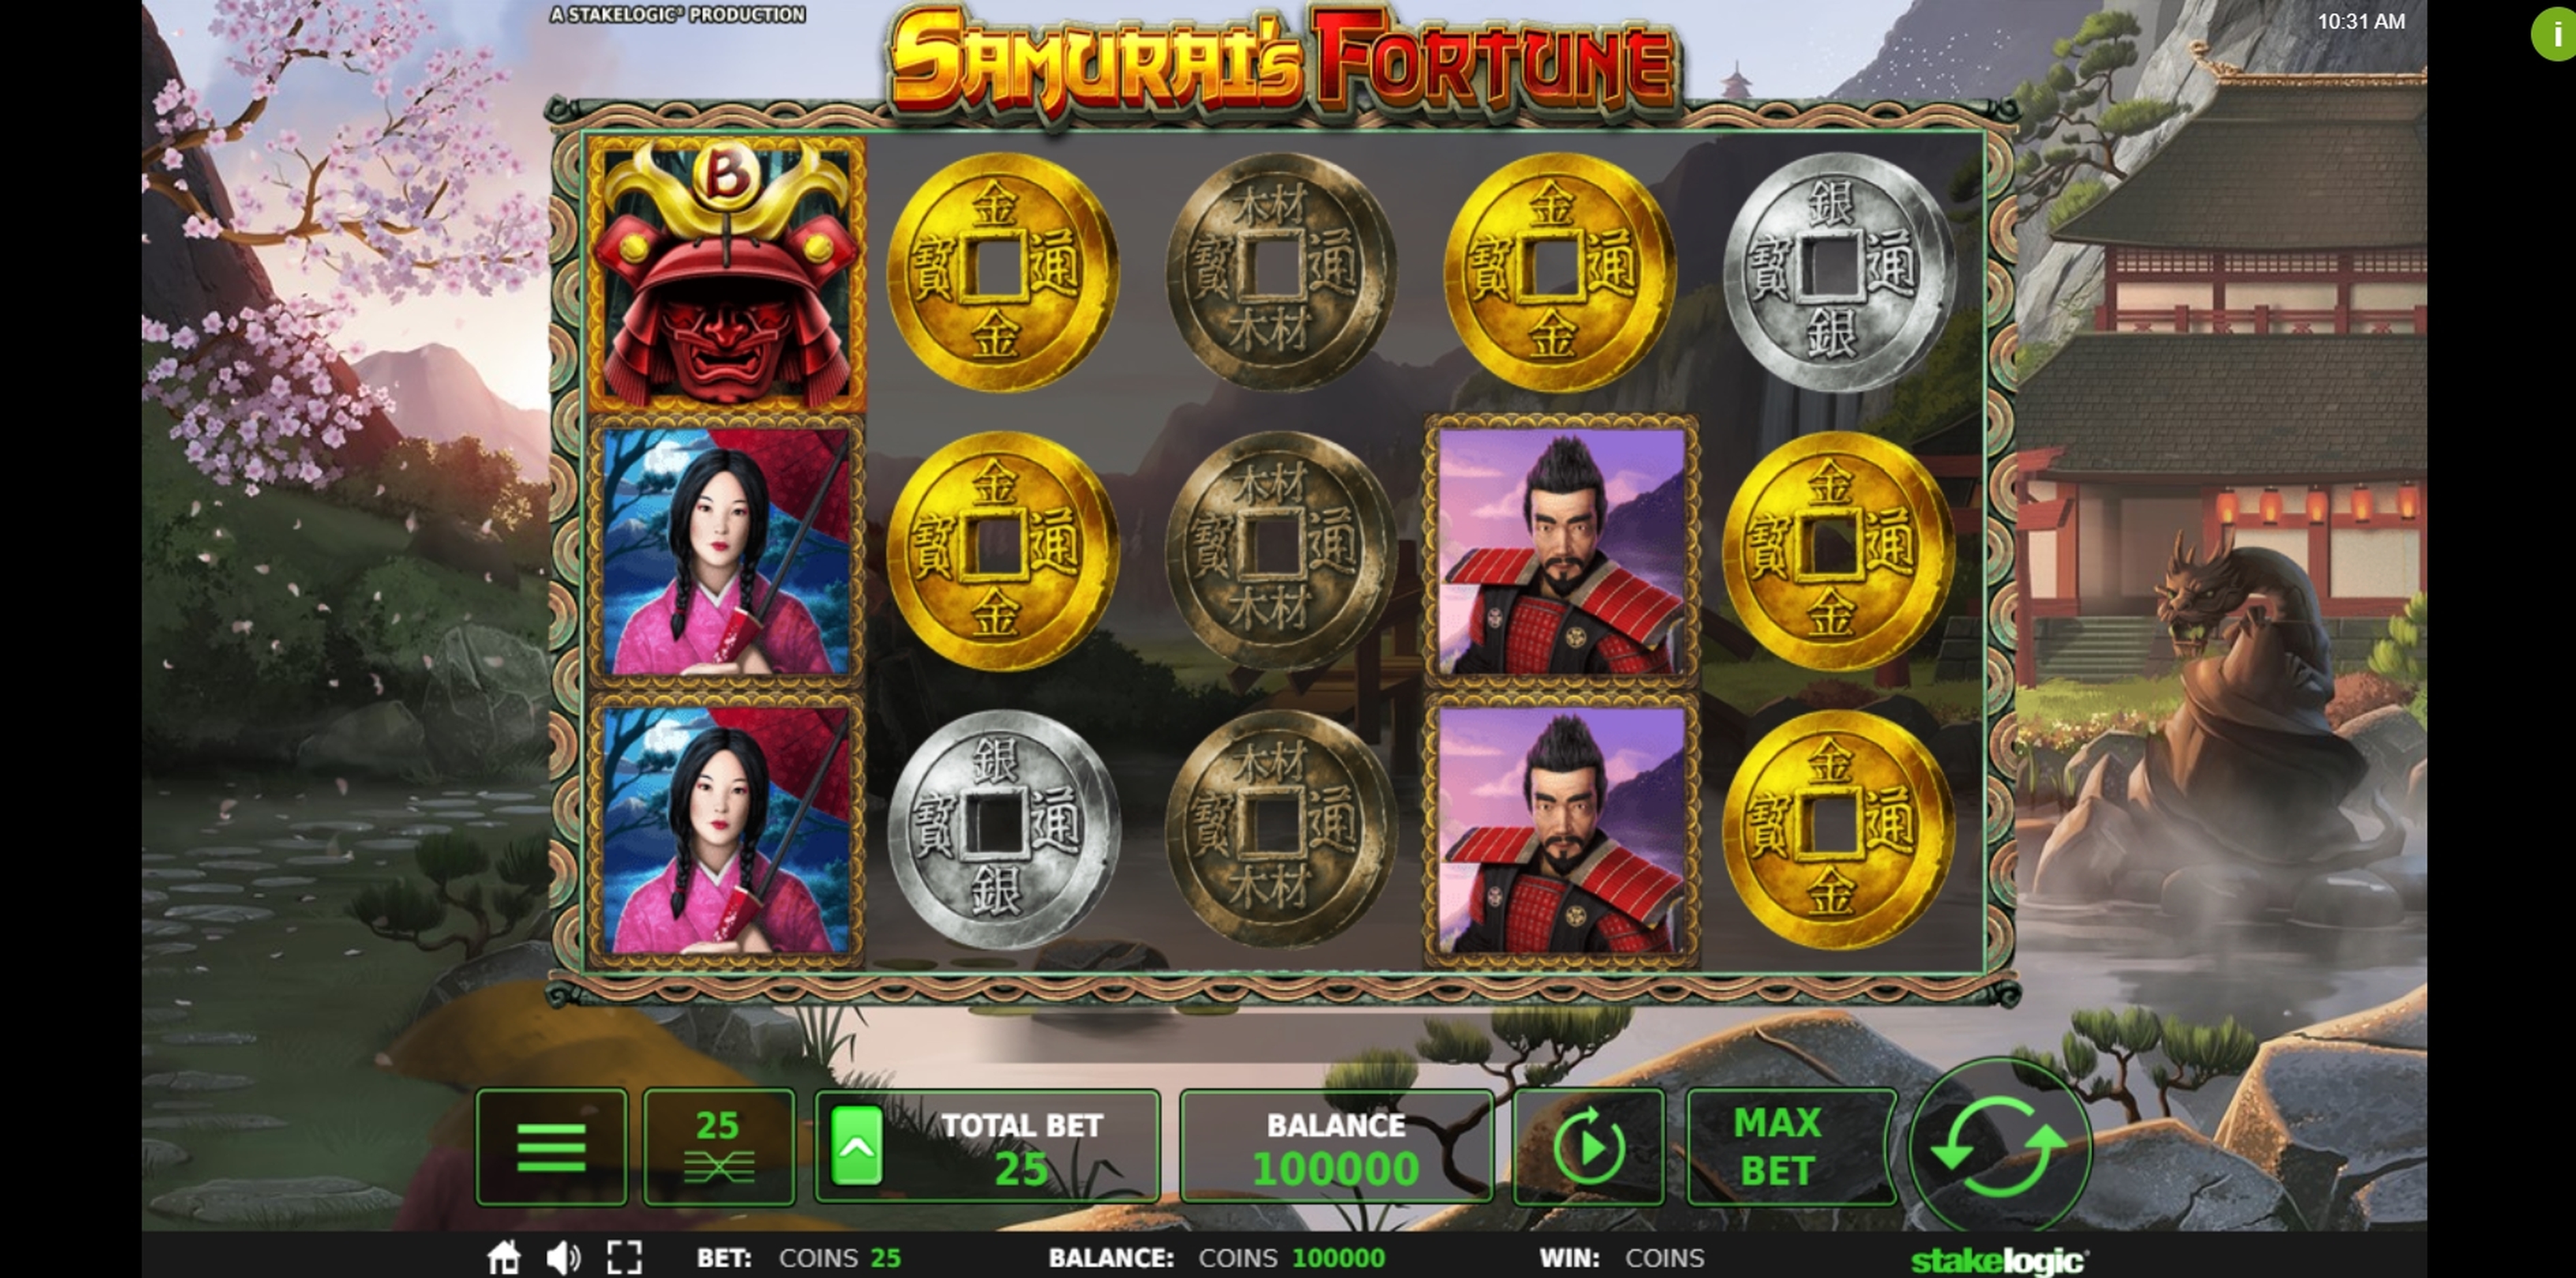 Reels in Samurai's Fortune Slot Game by Stakelogic